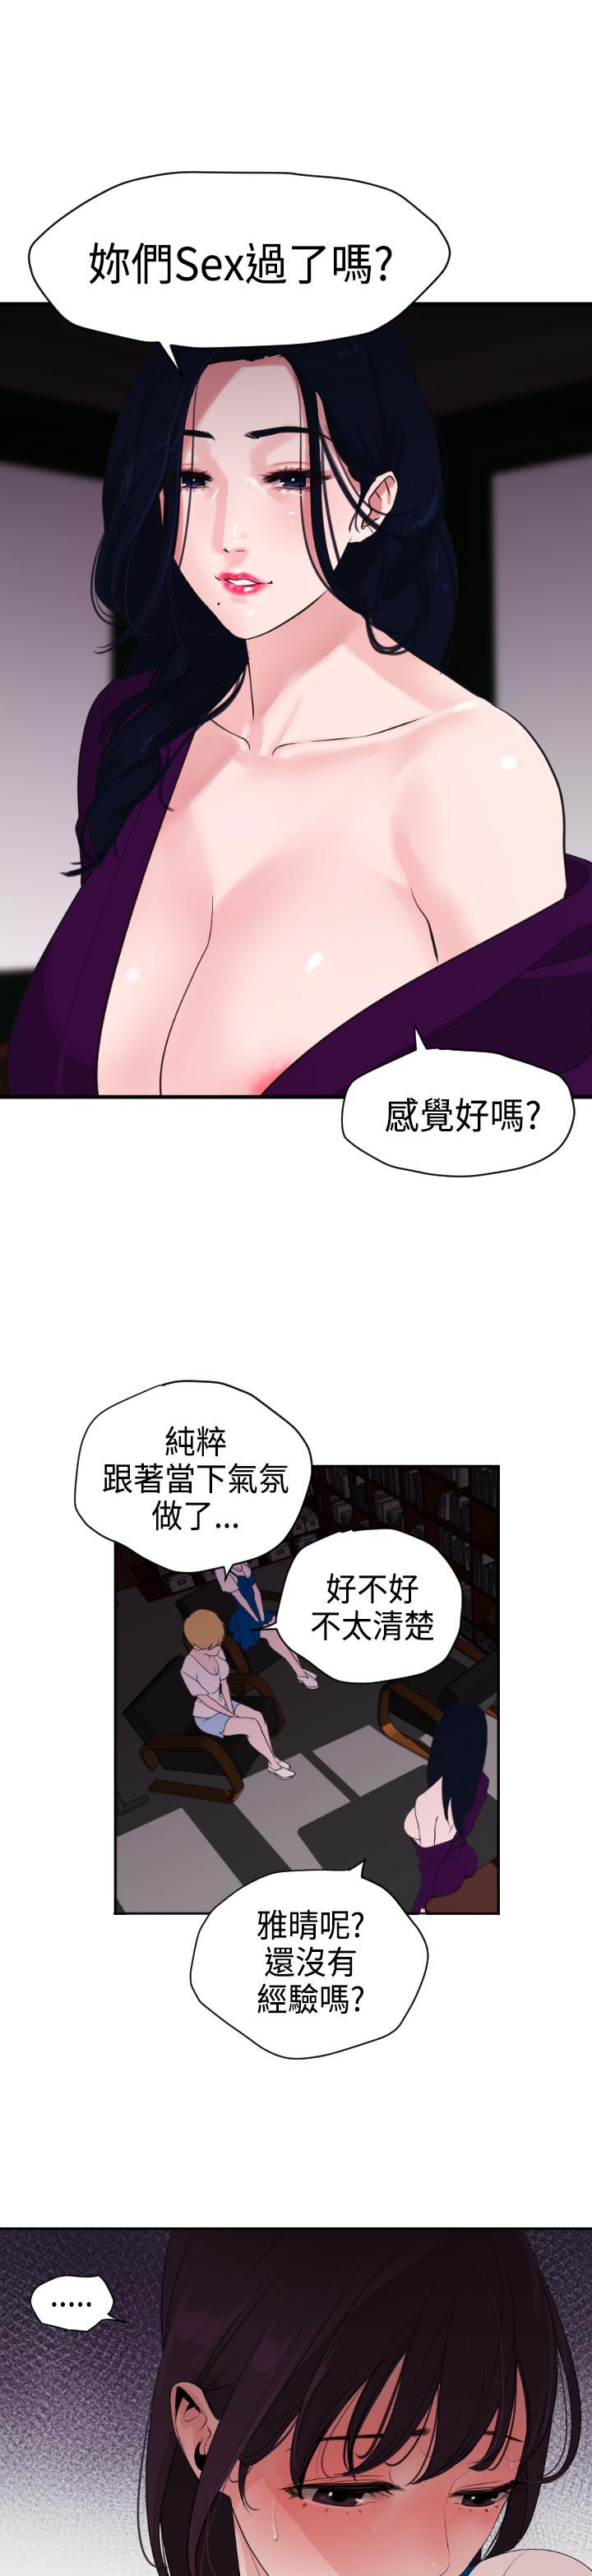 Desire King (慾求王) Ch.1-16 (chinese) 98